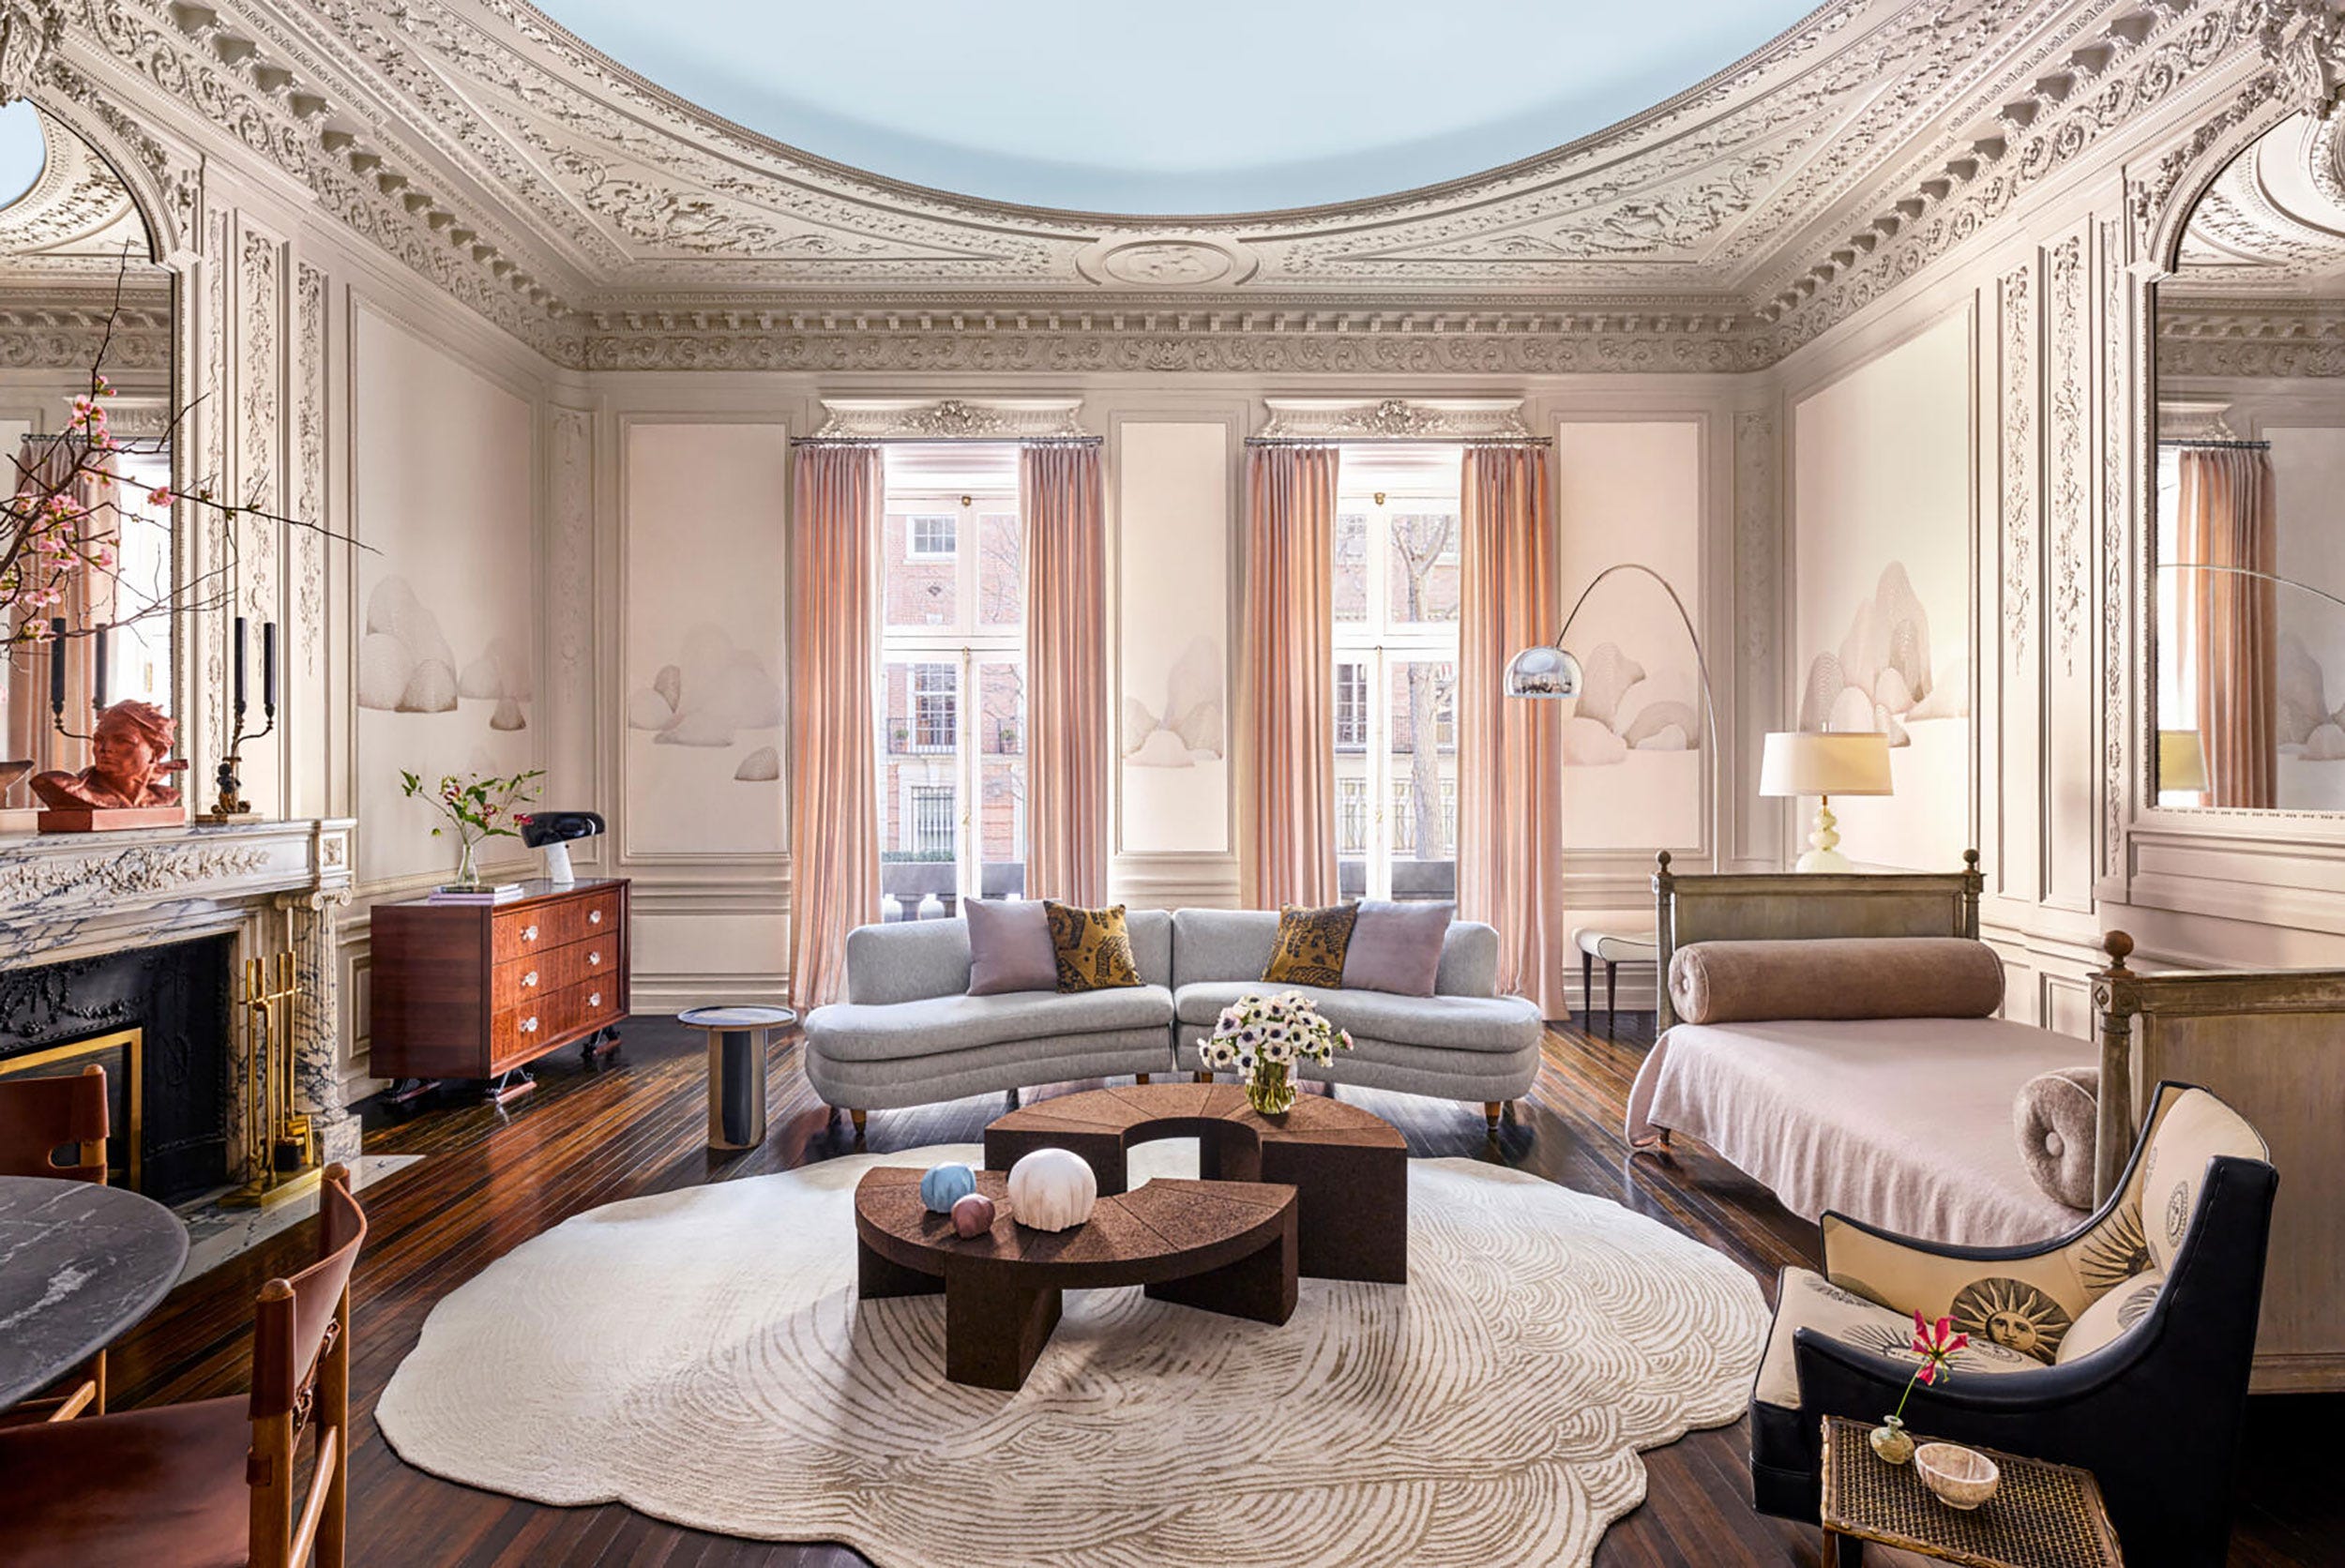 Is This the World's Most Glamorous One-Room Home?